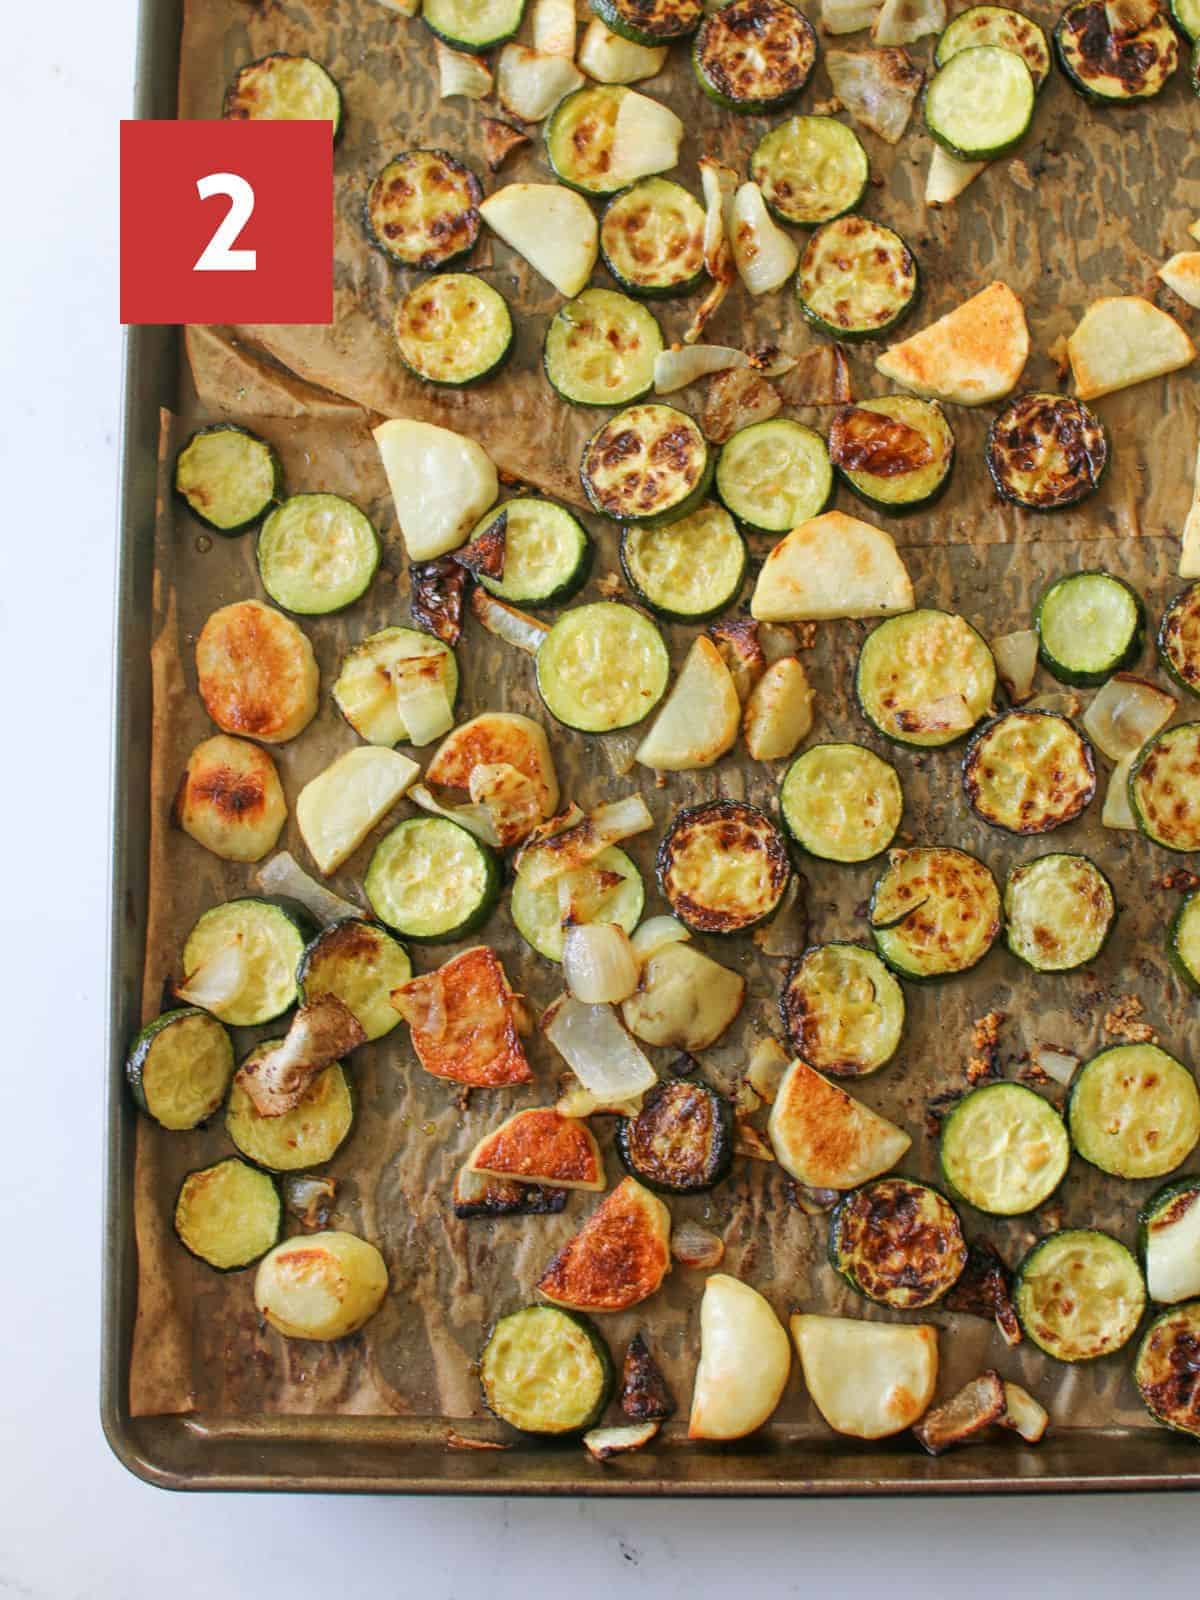 Roasted potatoes, zucchini, onion and garlic on a large sheet pan with brown parchment paper on a white marble background with a red box with a white '2' in the upper left corner.